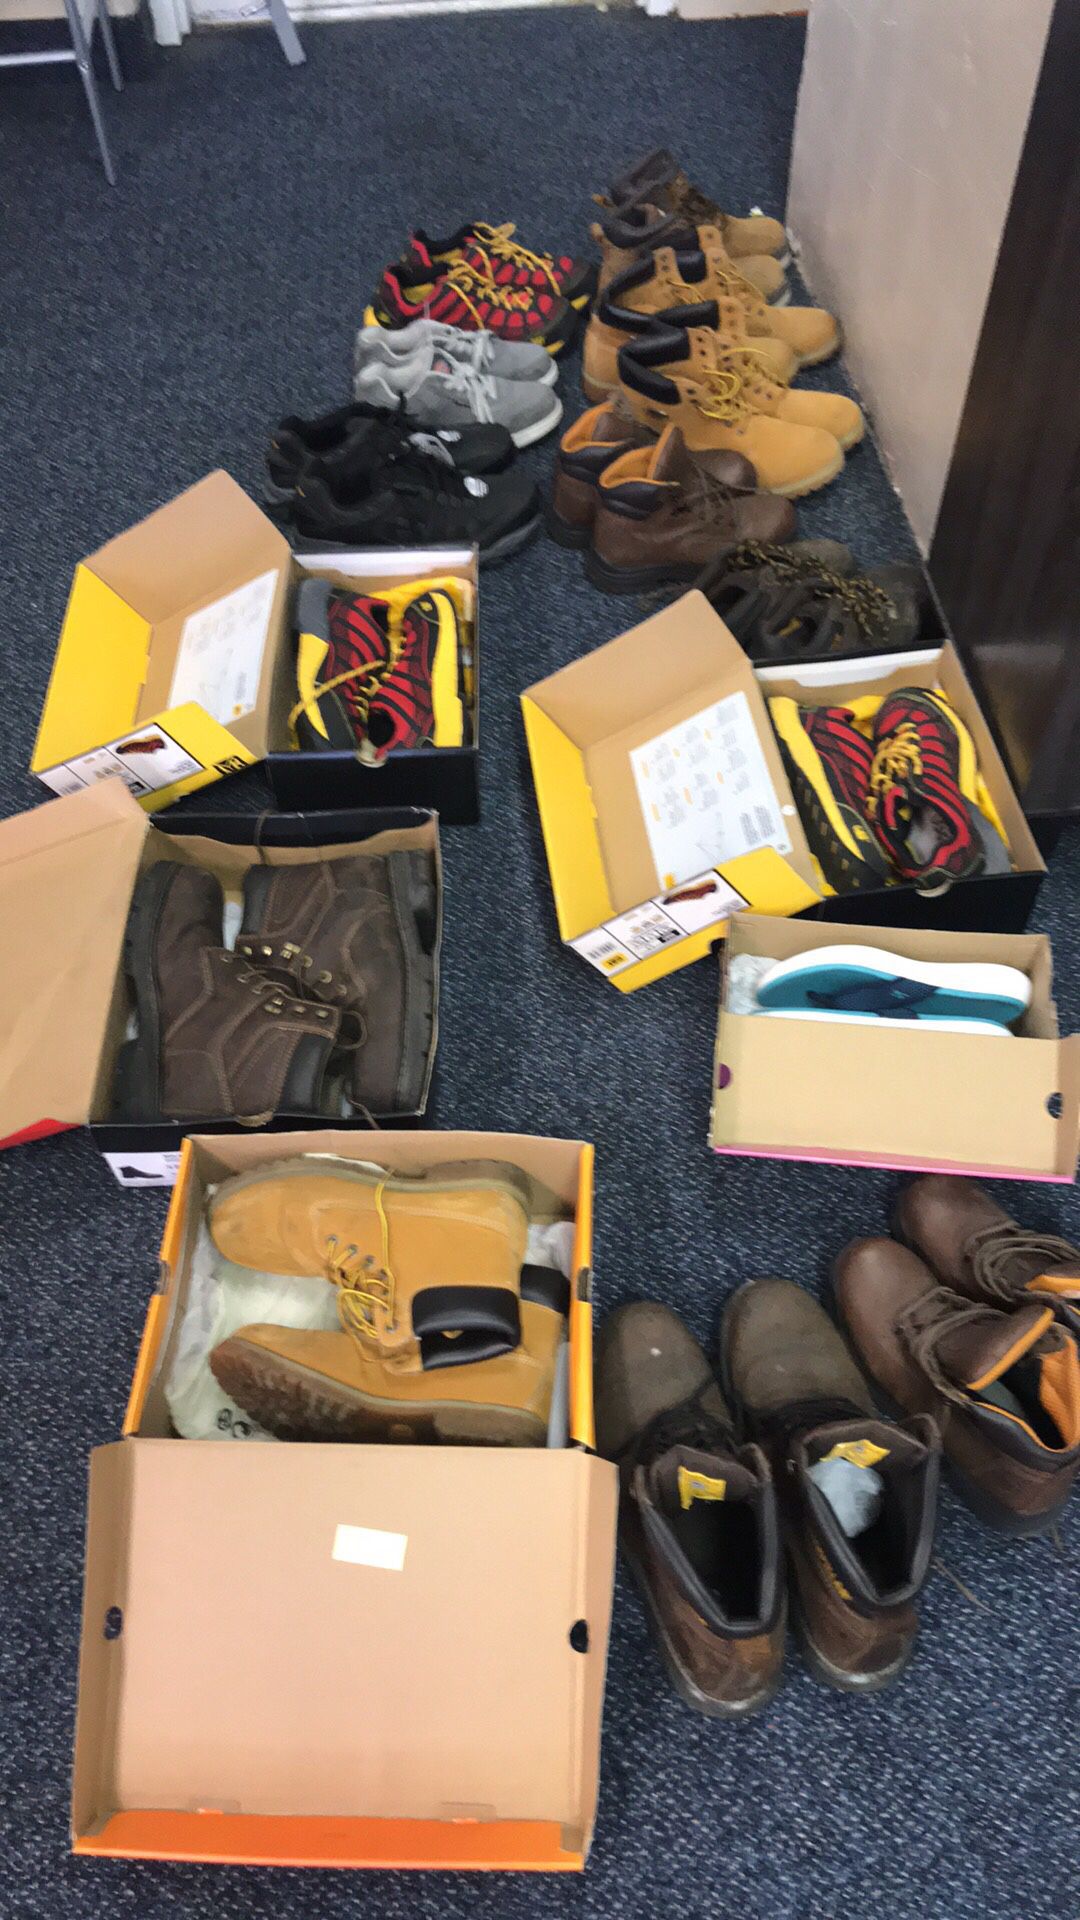 Work boots and work shoes.. 15 pairs total